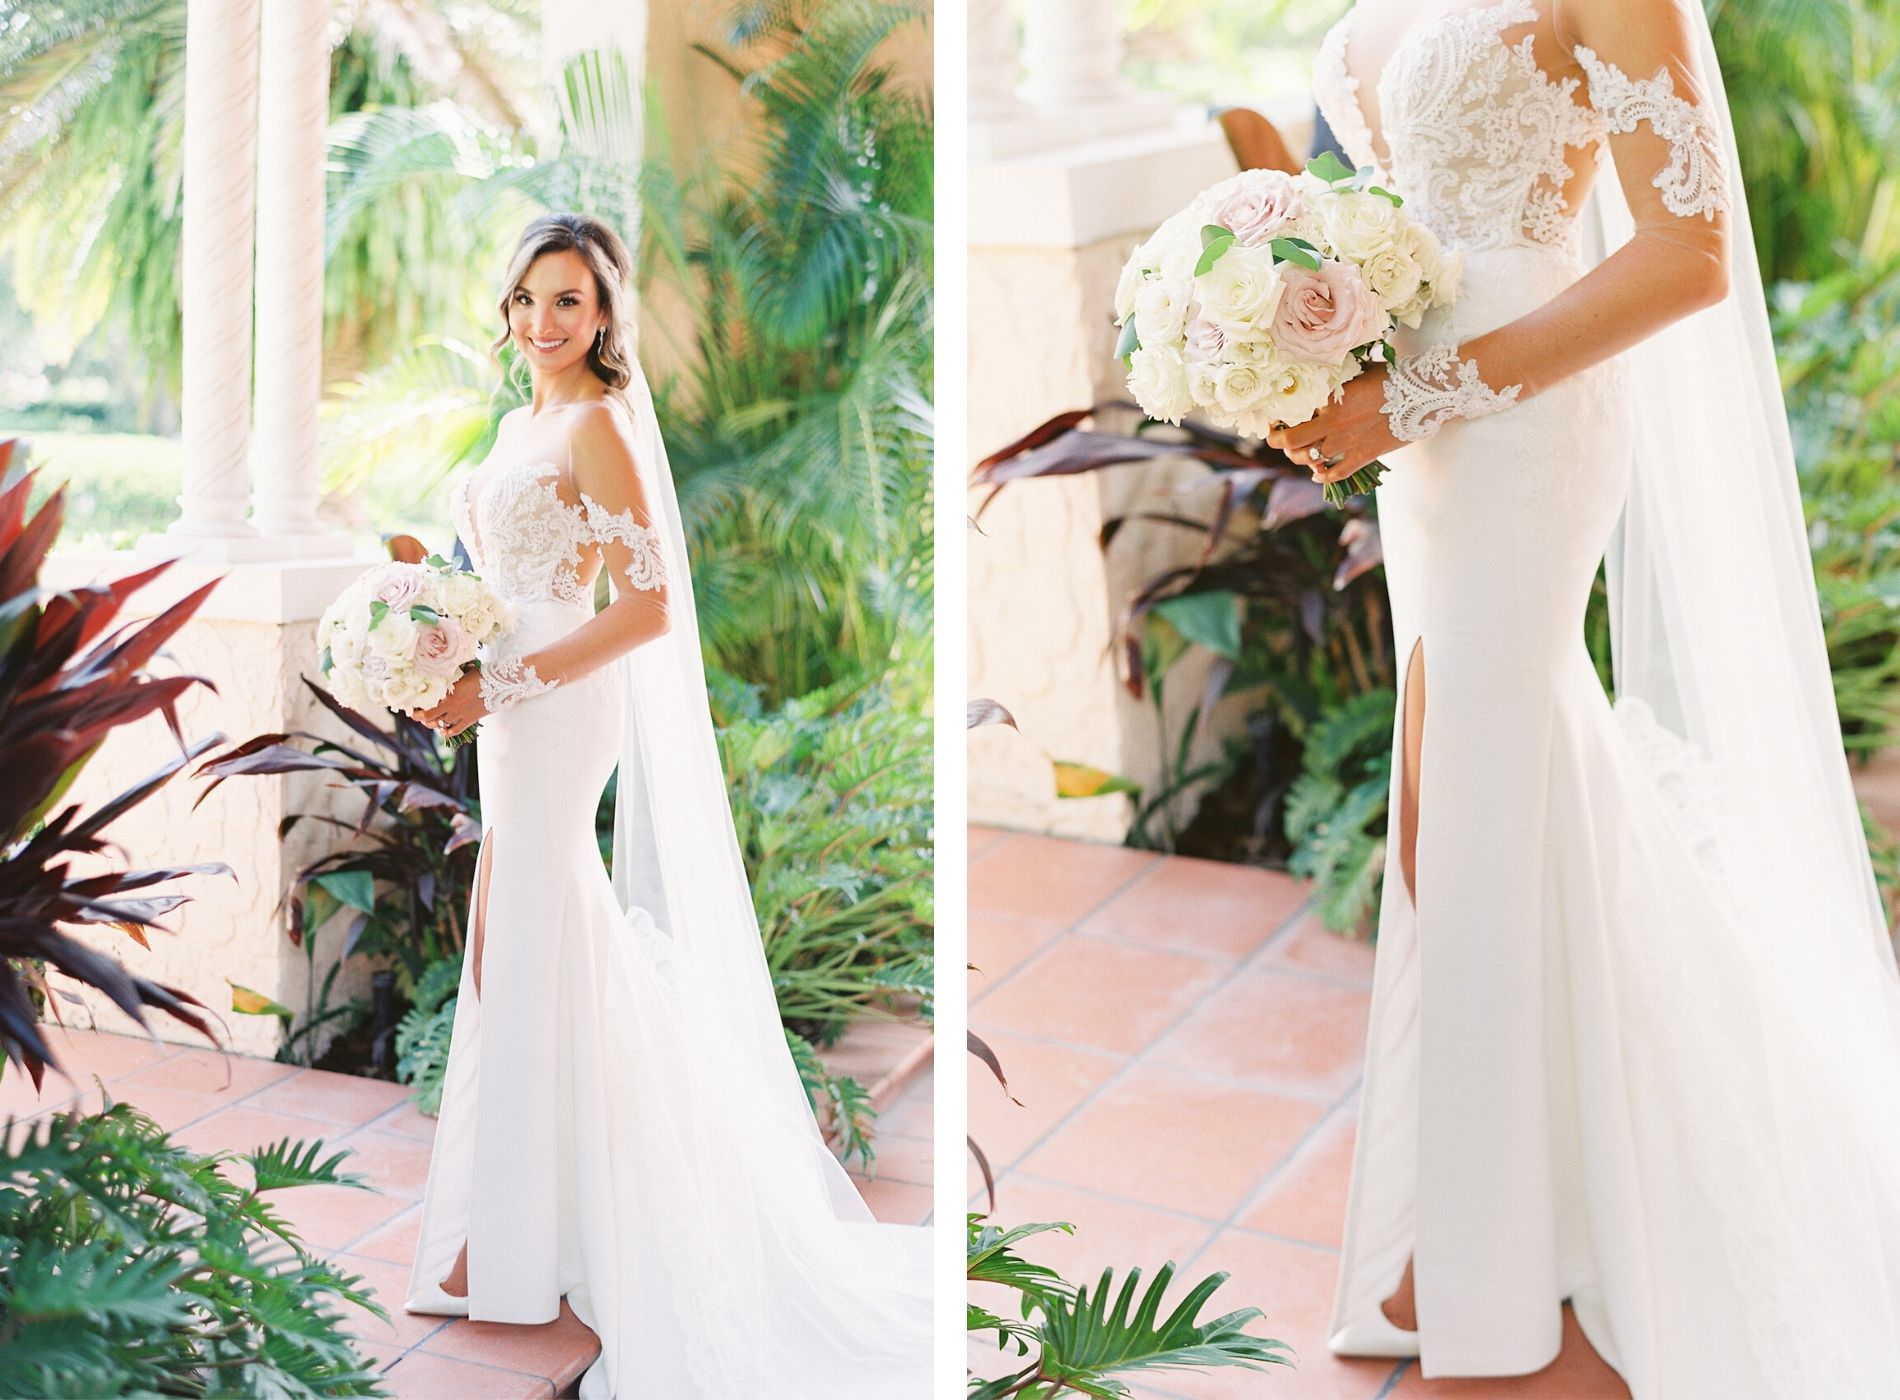 Ines di Santo Designer Bridal Gown Illusion Lace Sexy Wedding Dress | Tampa Wedding Venue Avila Golf & Country Club | White and Blush Pink Round Rose Bridal Bouquet | Isabel O'Neil Bridal Collection